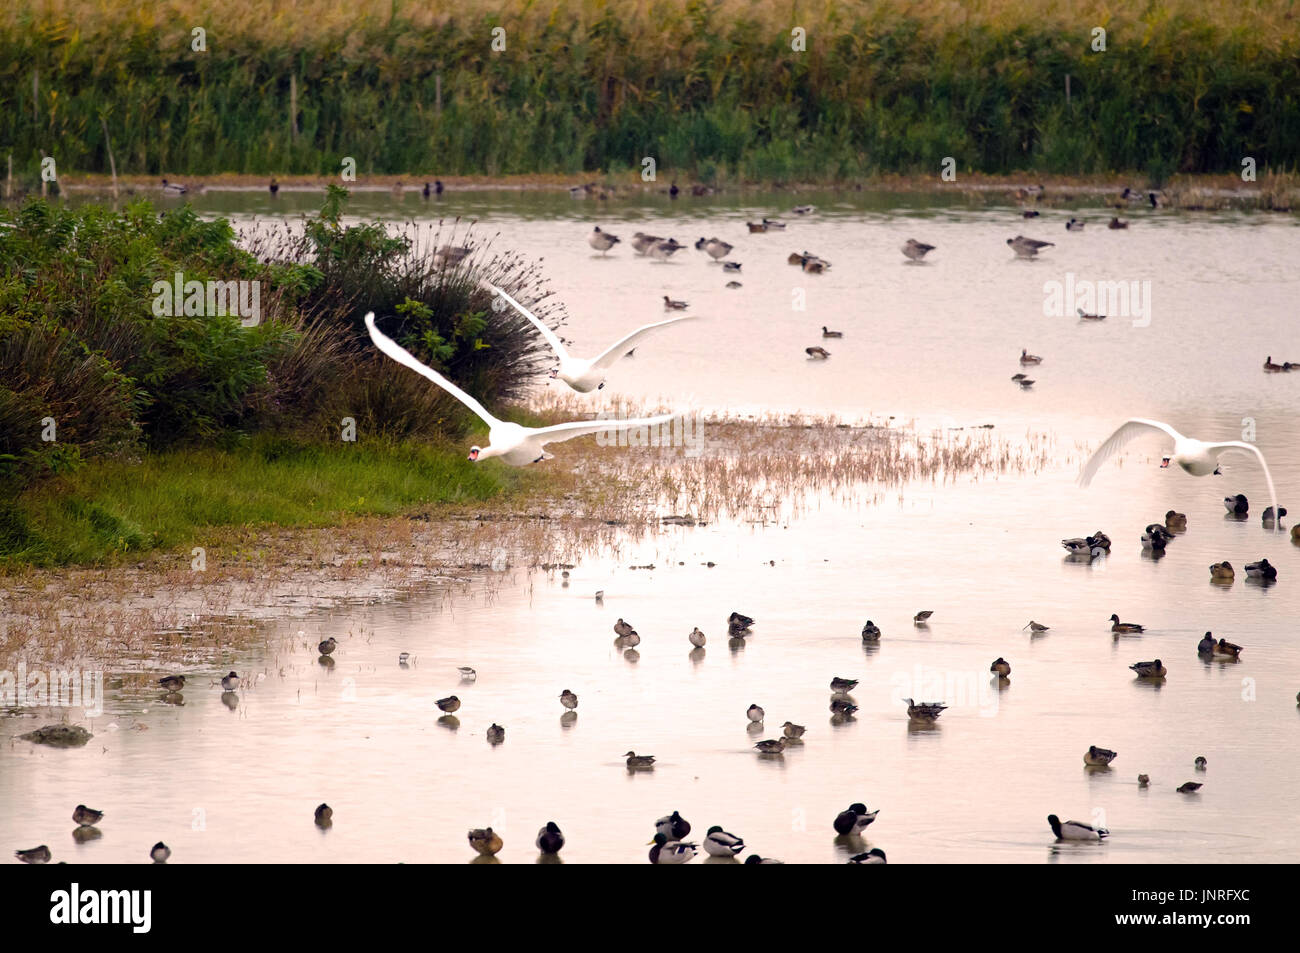 An example of wetland with high diversity and concentration of wintering bird species (Italy, Isola della Cona). Stock Photo